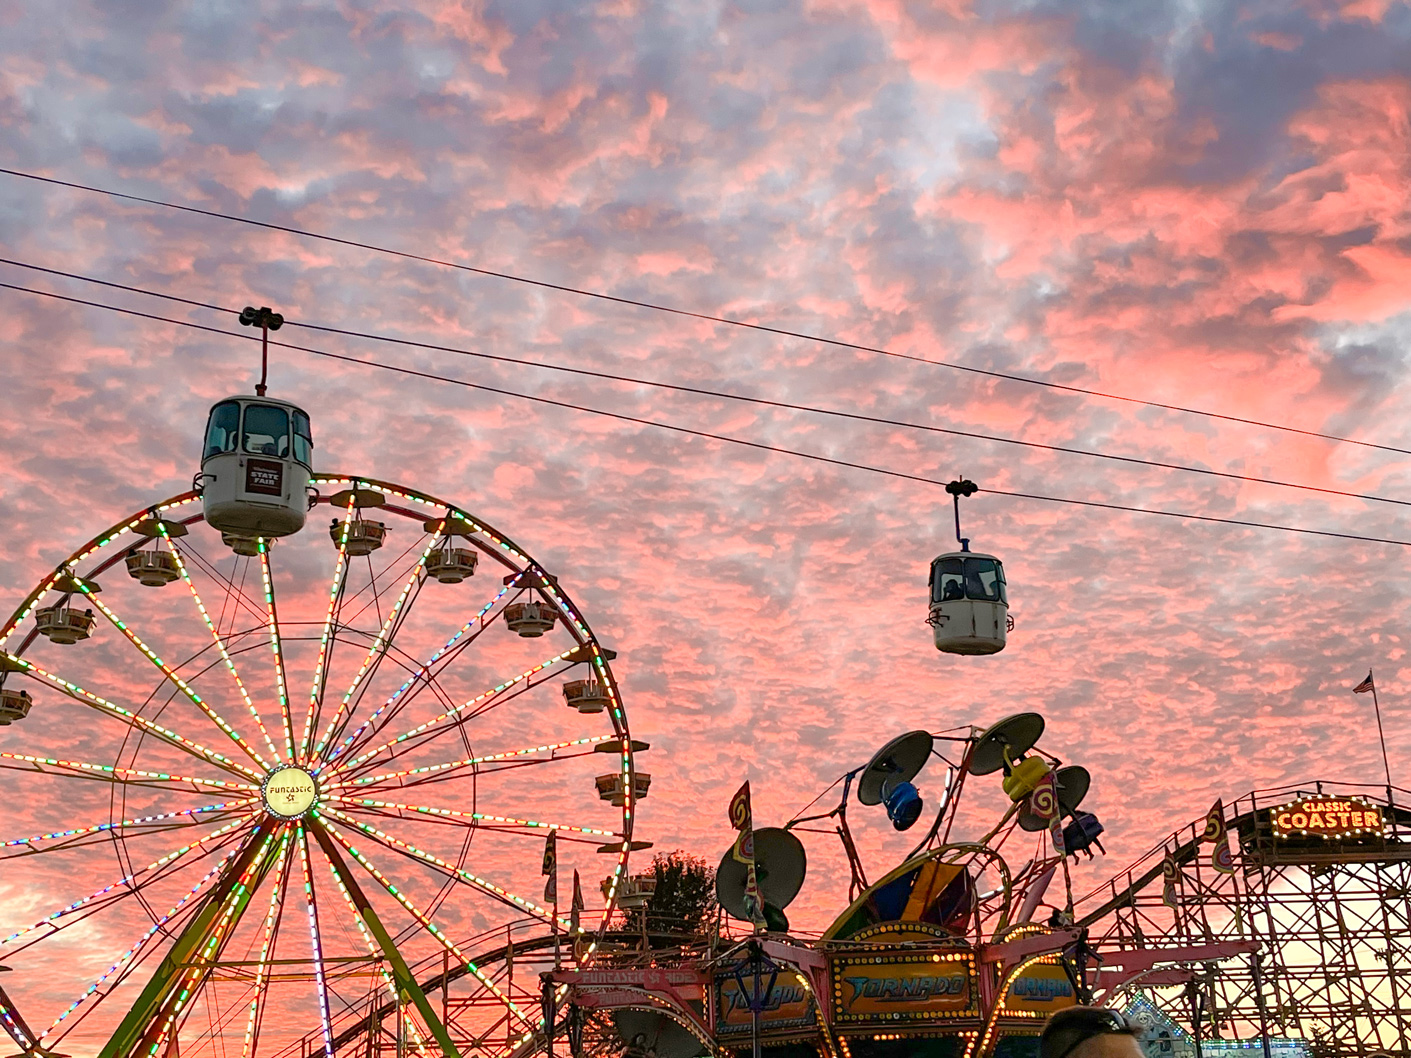 Washington State Fair concludes its 116th year, just in time for